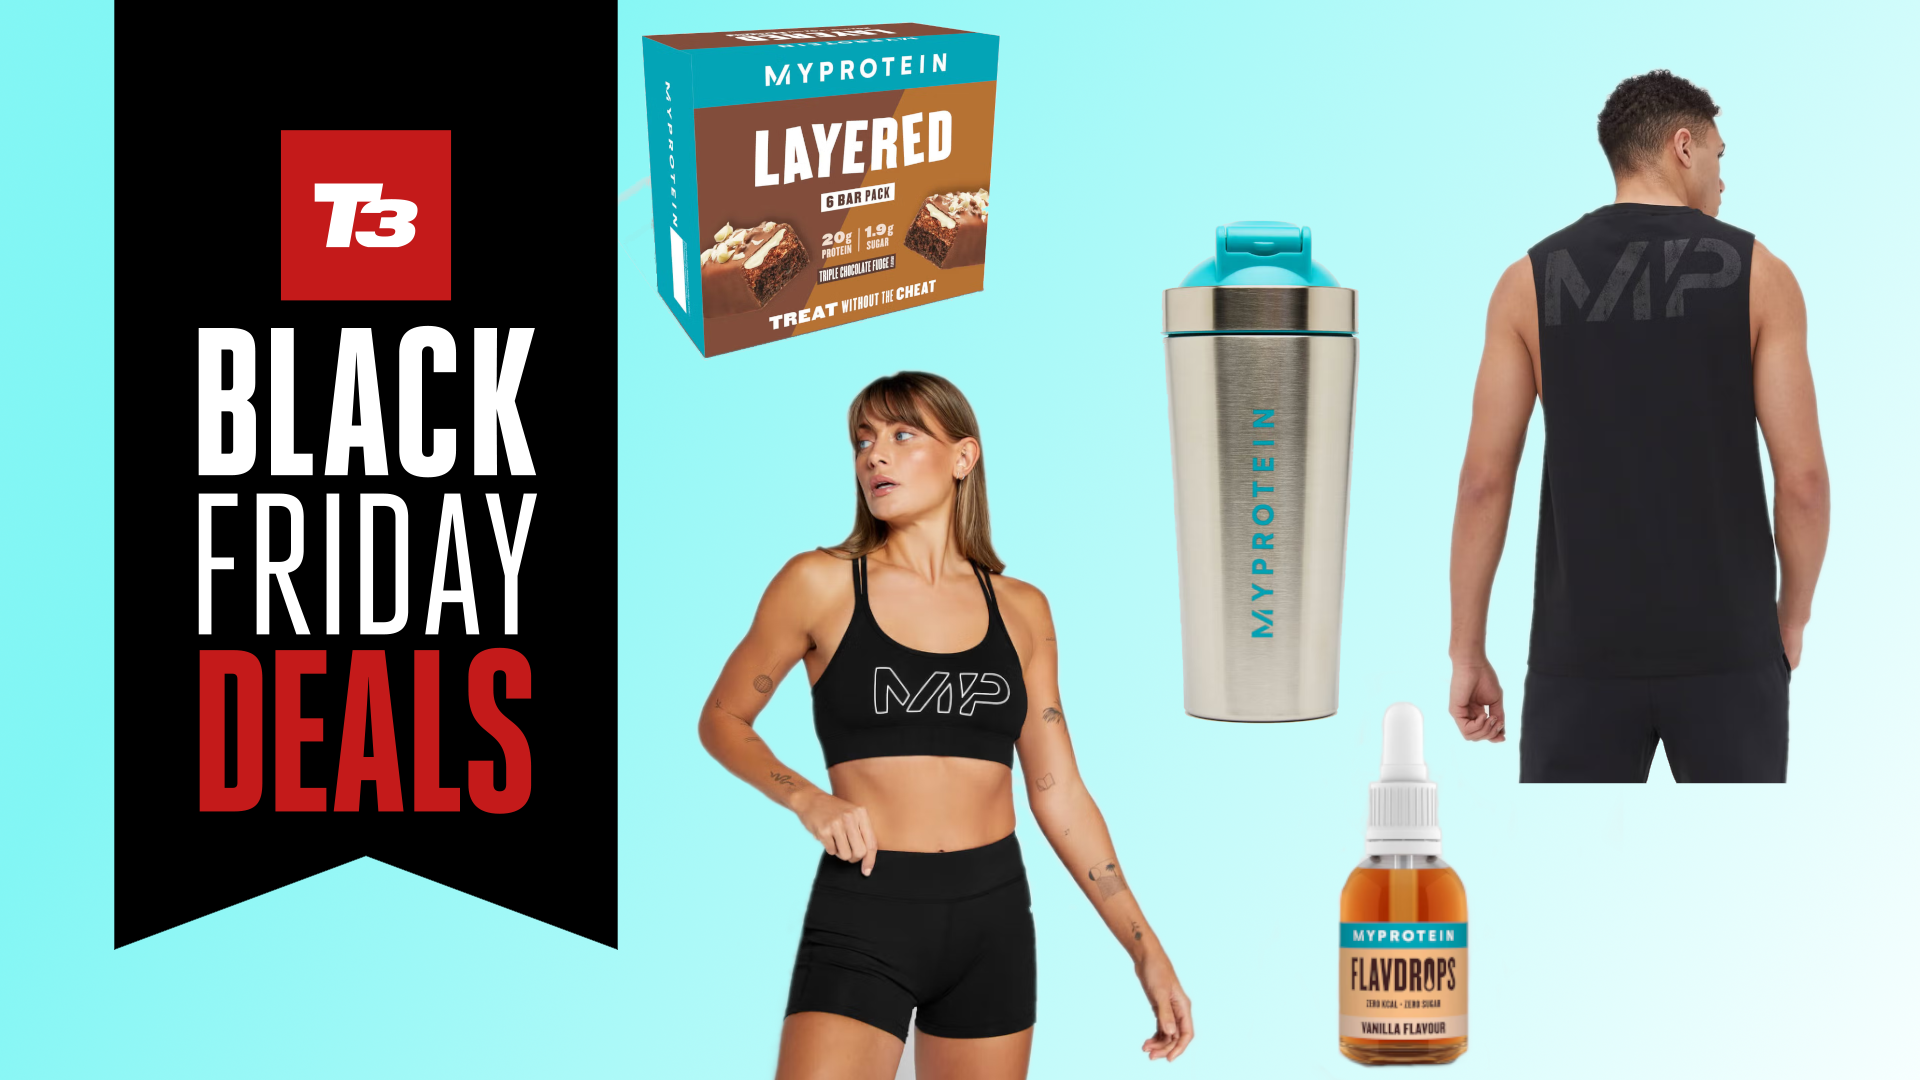 10 items for £10 (or less) I'm loving in Myprotein's Black Friday